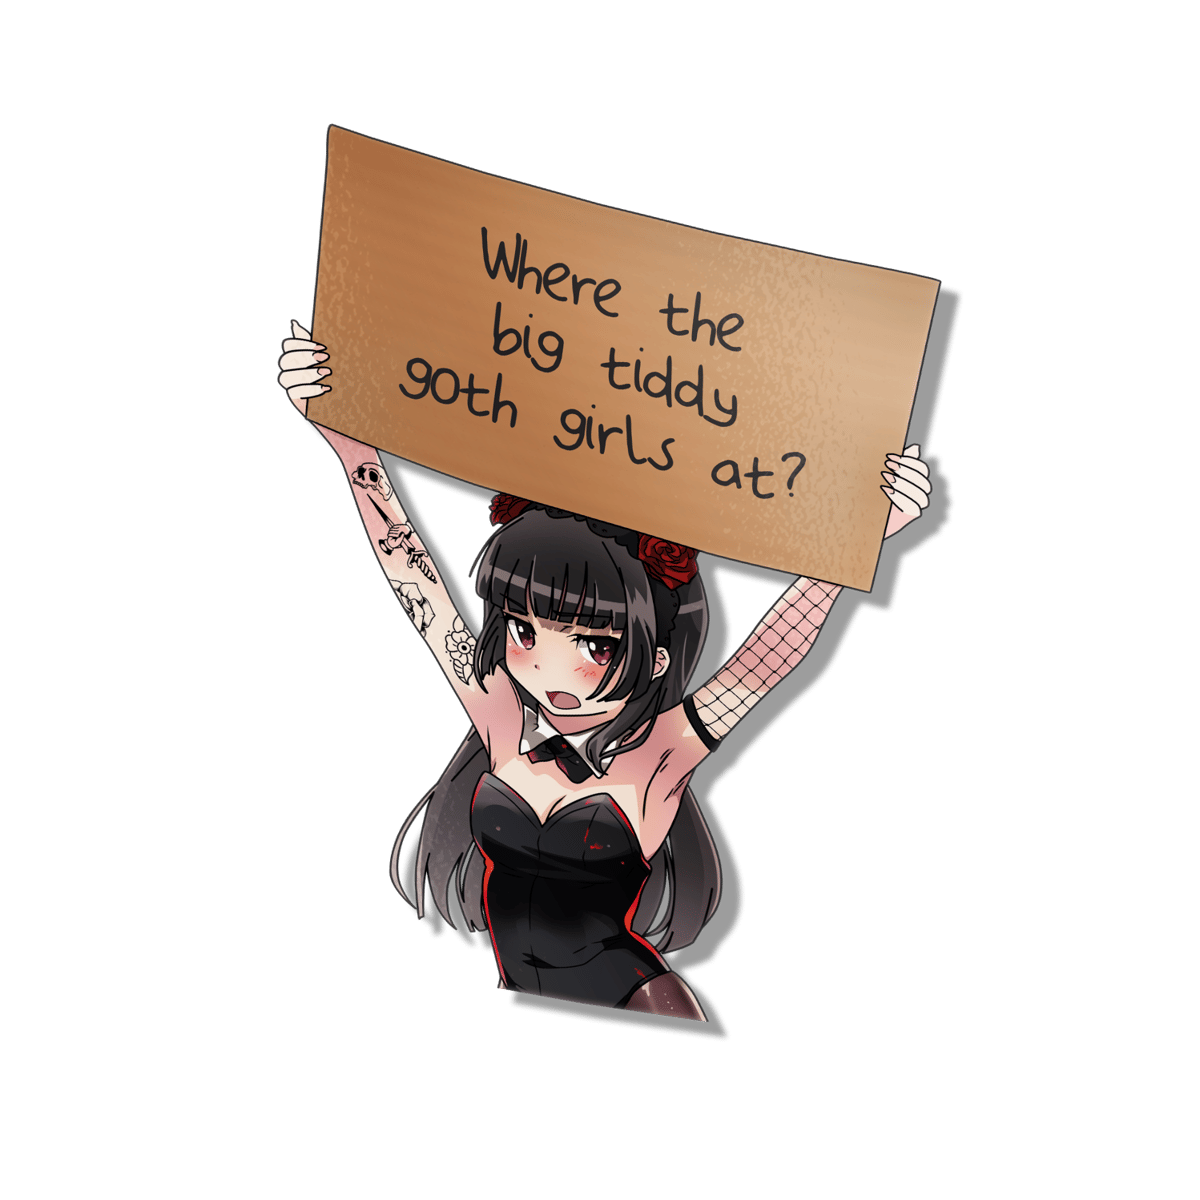 Image of Goth Girl With A Sign